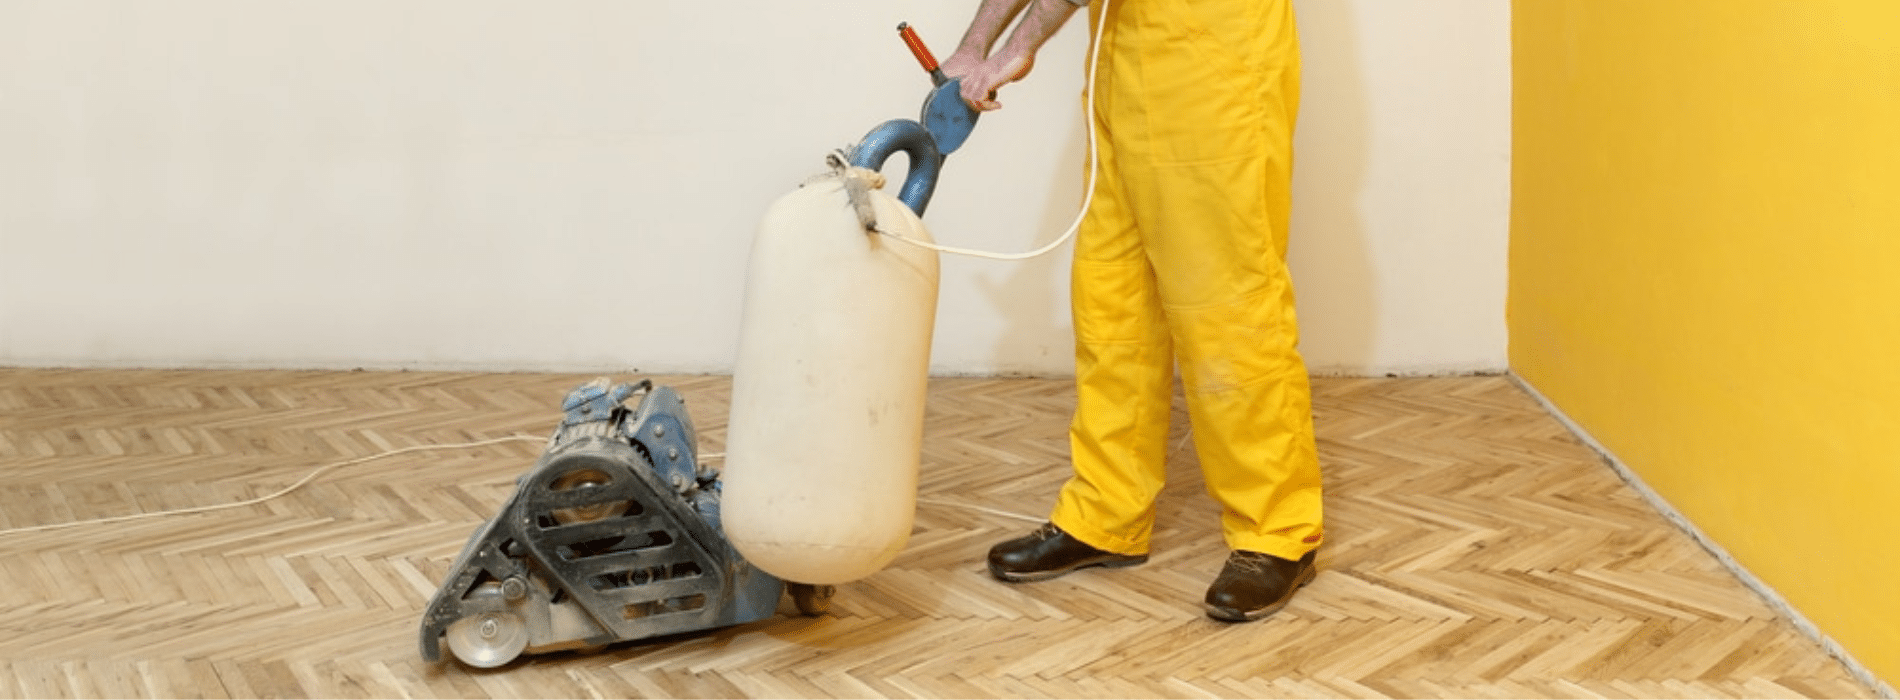 In Forest Hill, SE23, Mr Sander® are using a Bona Belt (2.2 kW) to sand a herringbone floor. The belt sander (250x750 mm) operates at 230 V and 50/60 Hz. It is connected to a dust extraction system with a HEPA filter, ensuring a clean and efficient outcome.